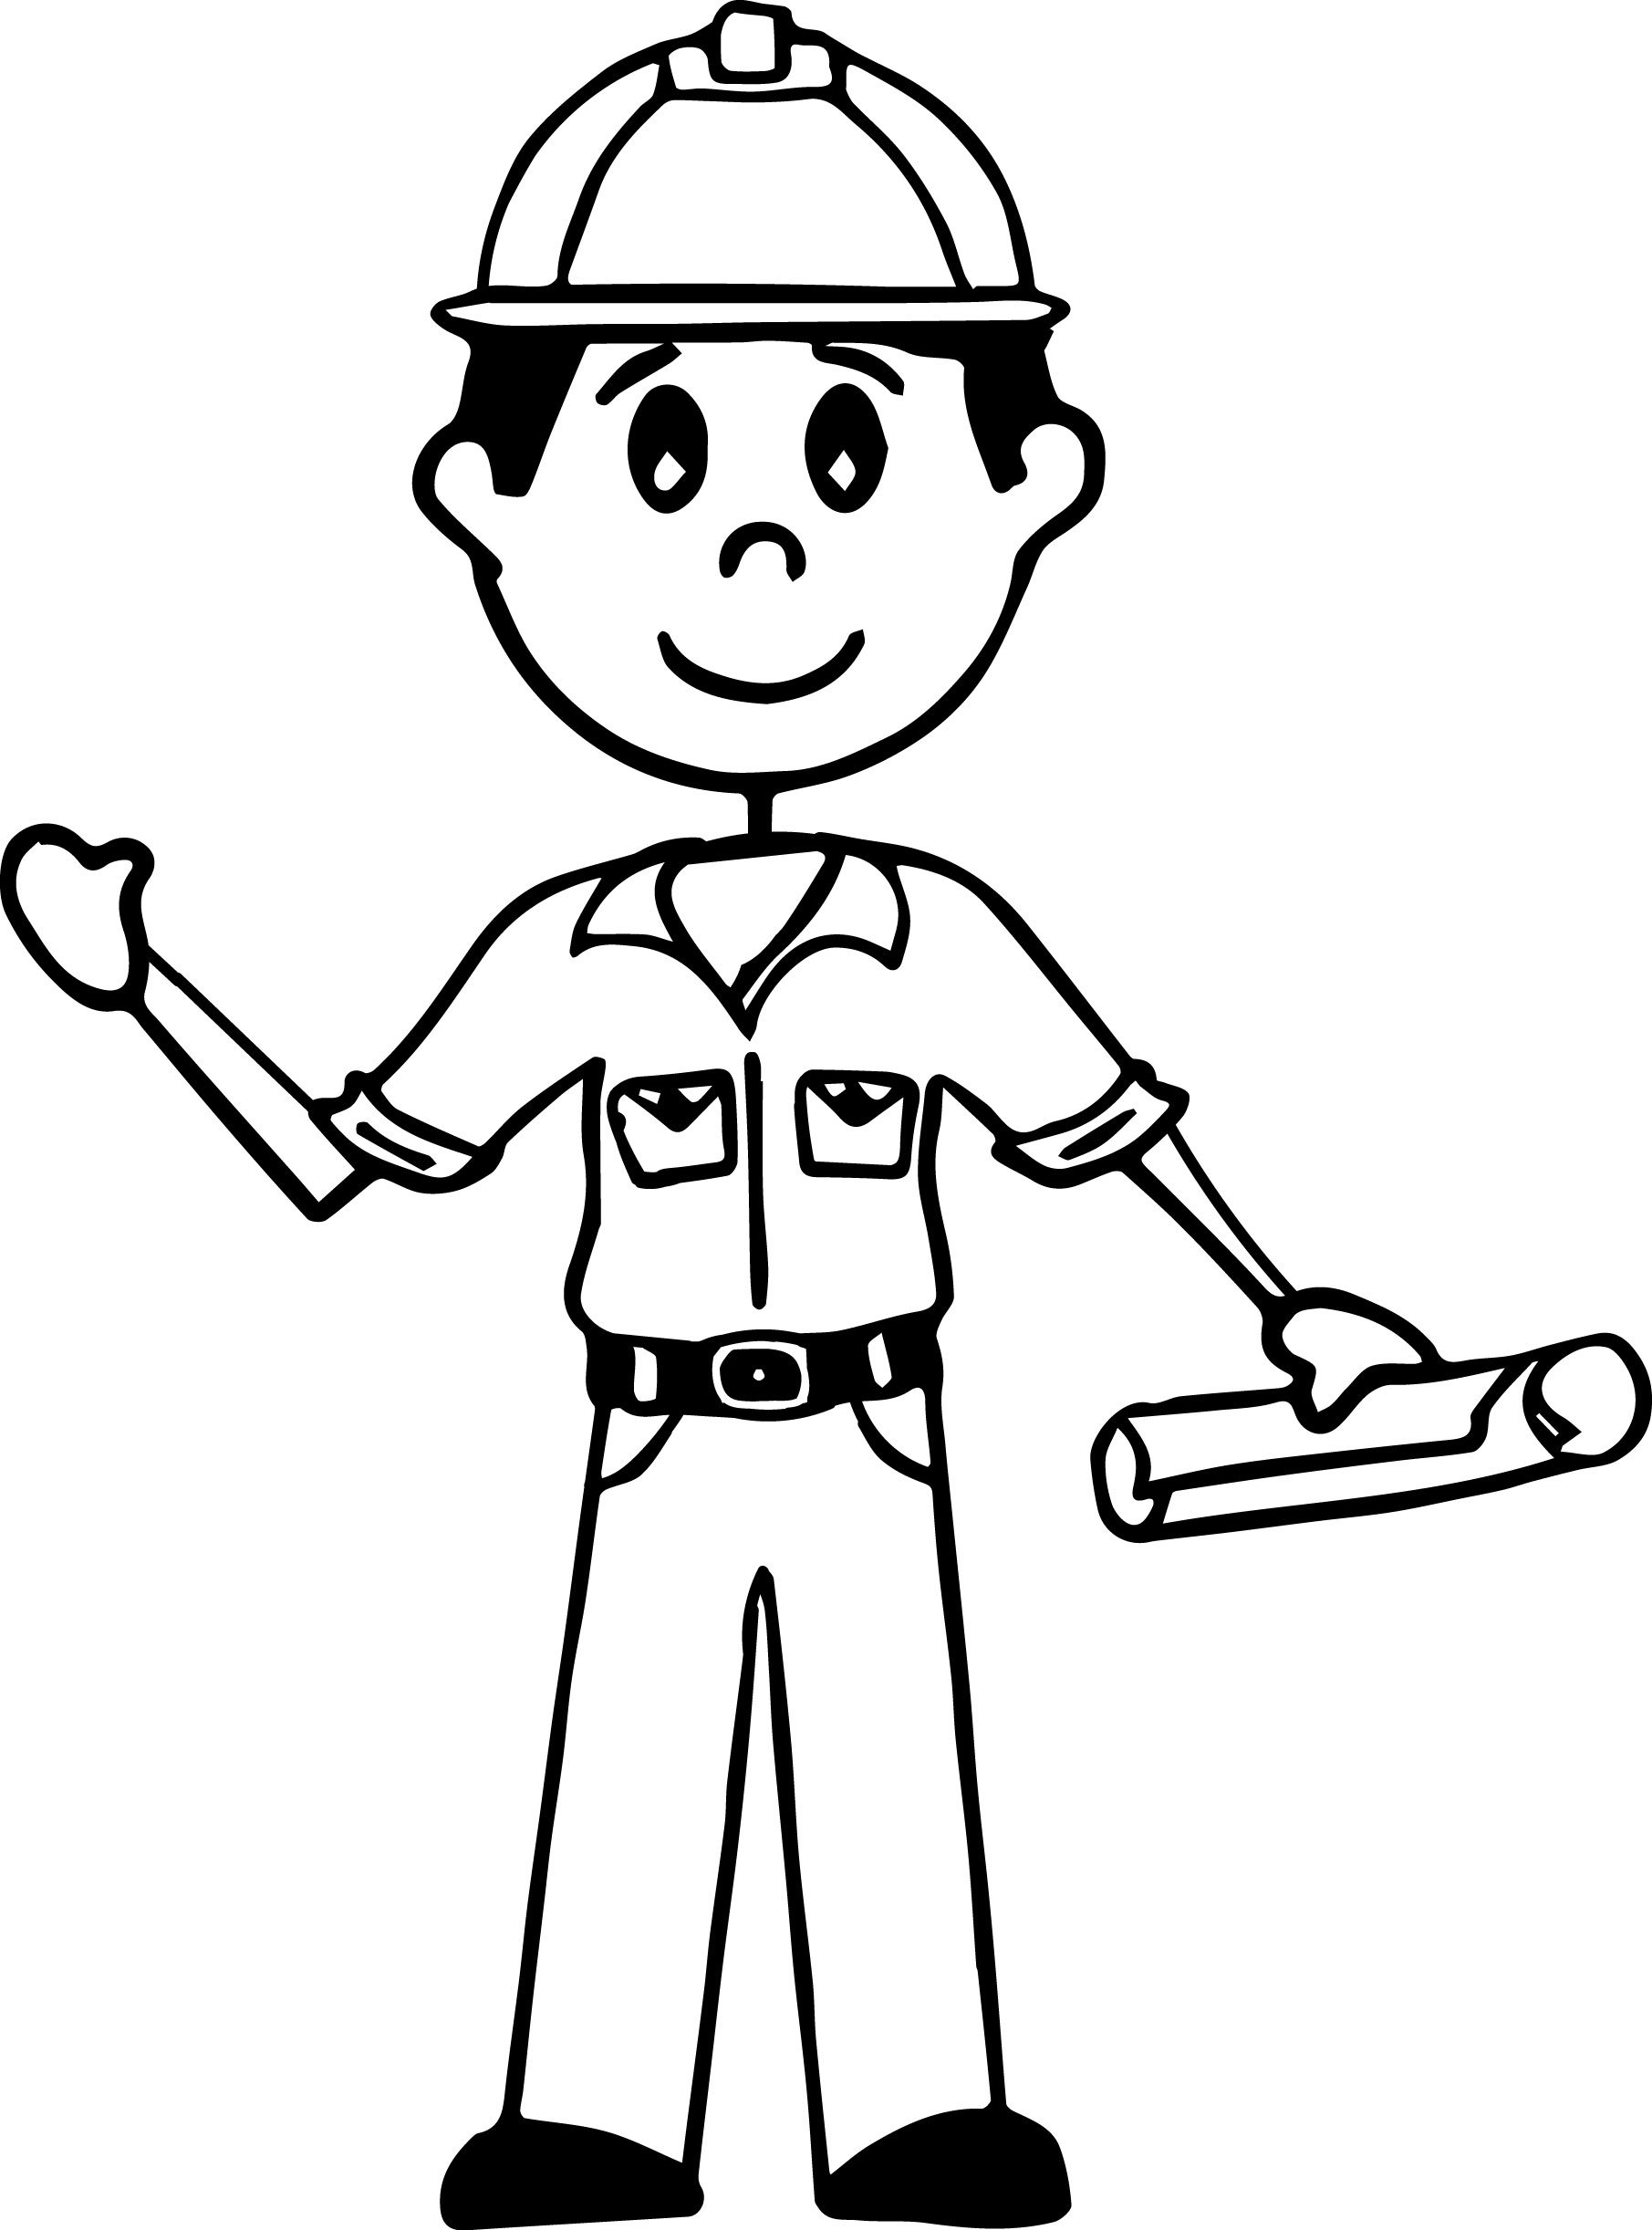 Stickman Coloring Pages at GetColorings.com | Free printable colorings